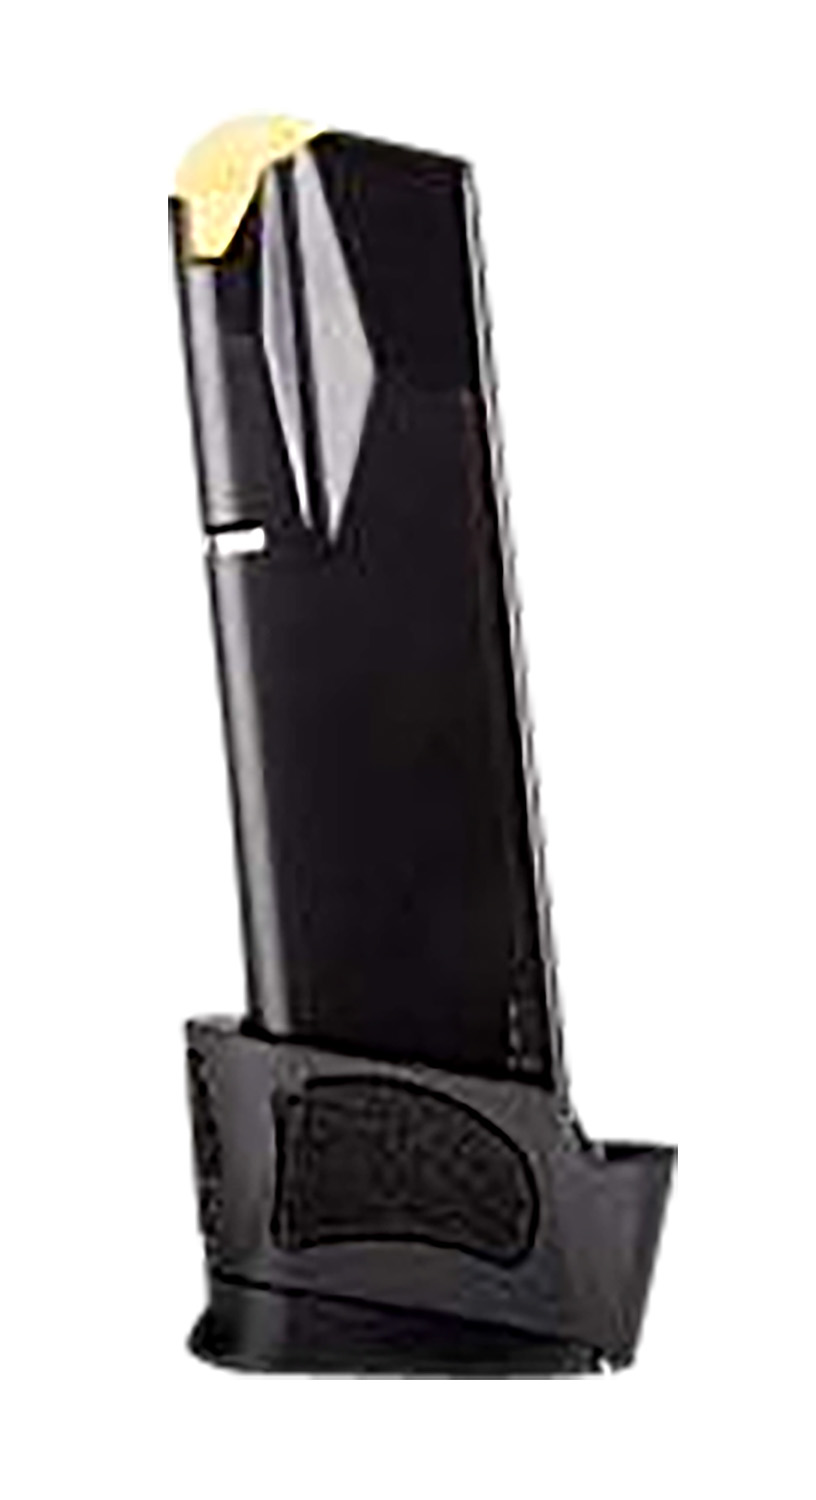 Taurus 389000902 G3 Magazine Pop Display (12 Mags) 17Rd 9mm Luger, Black Steel With Polymer Base Plate, Fits Taurus G3